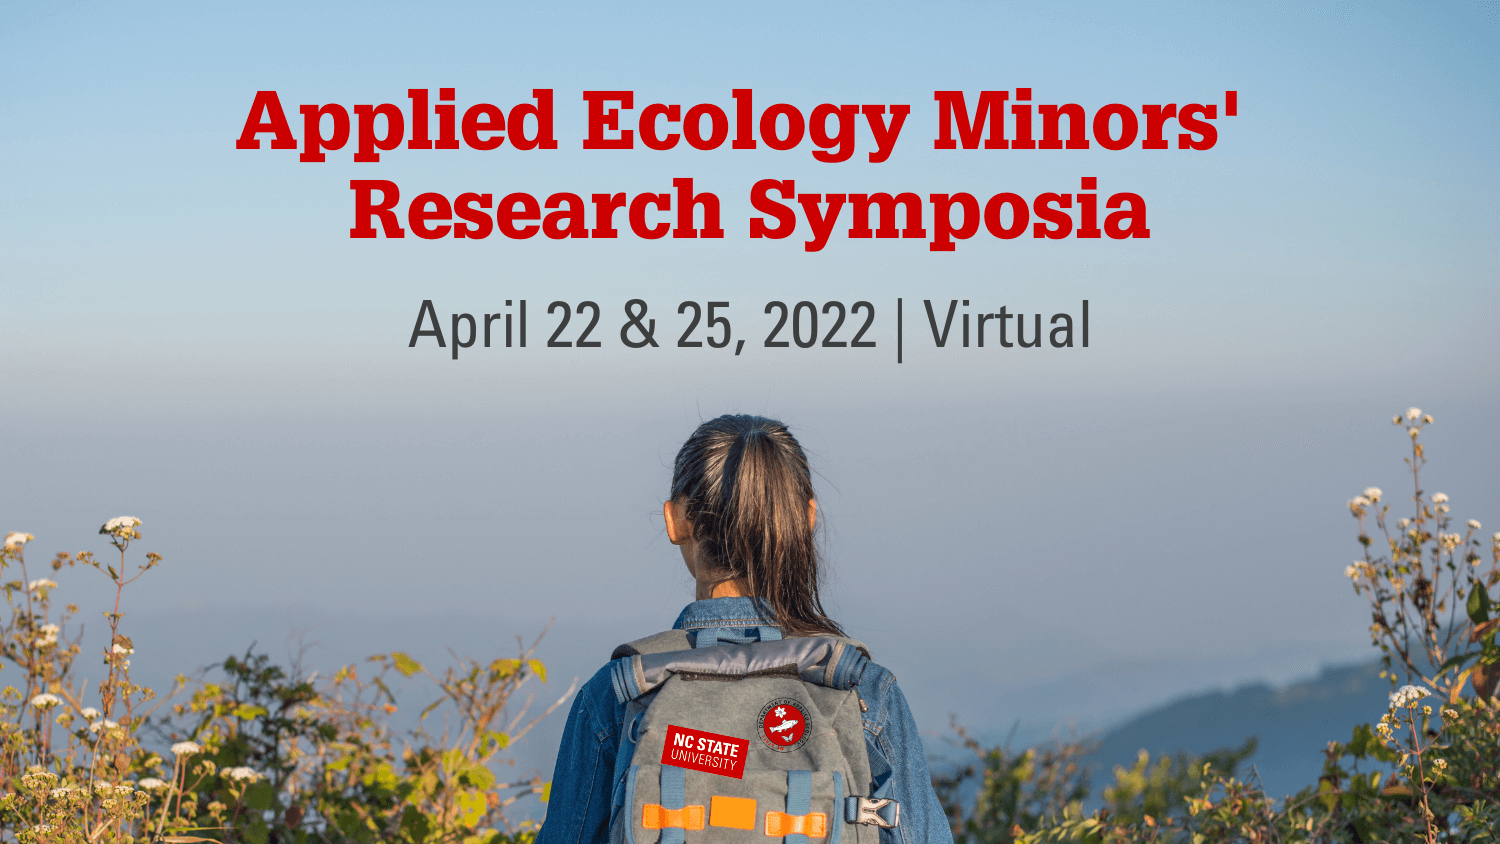 2022 Applied Ecology Minors' Research Symposia